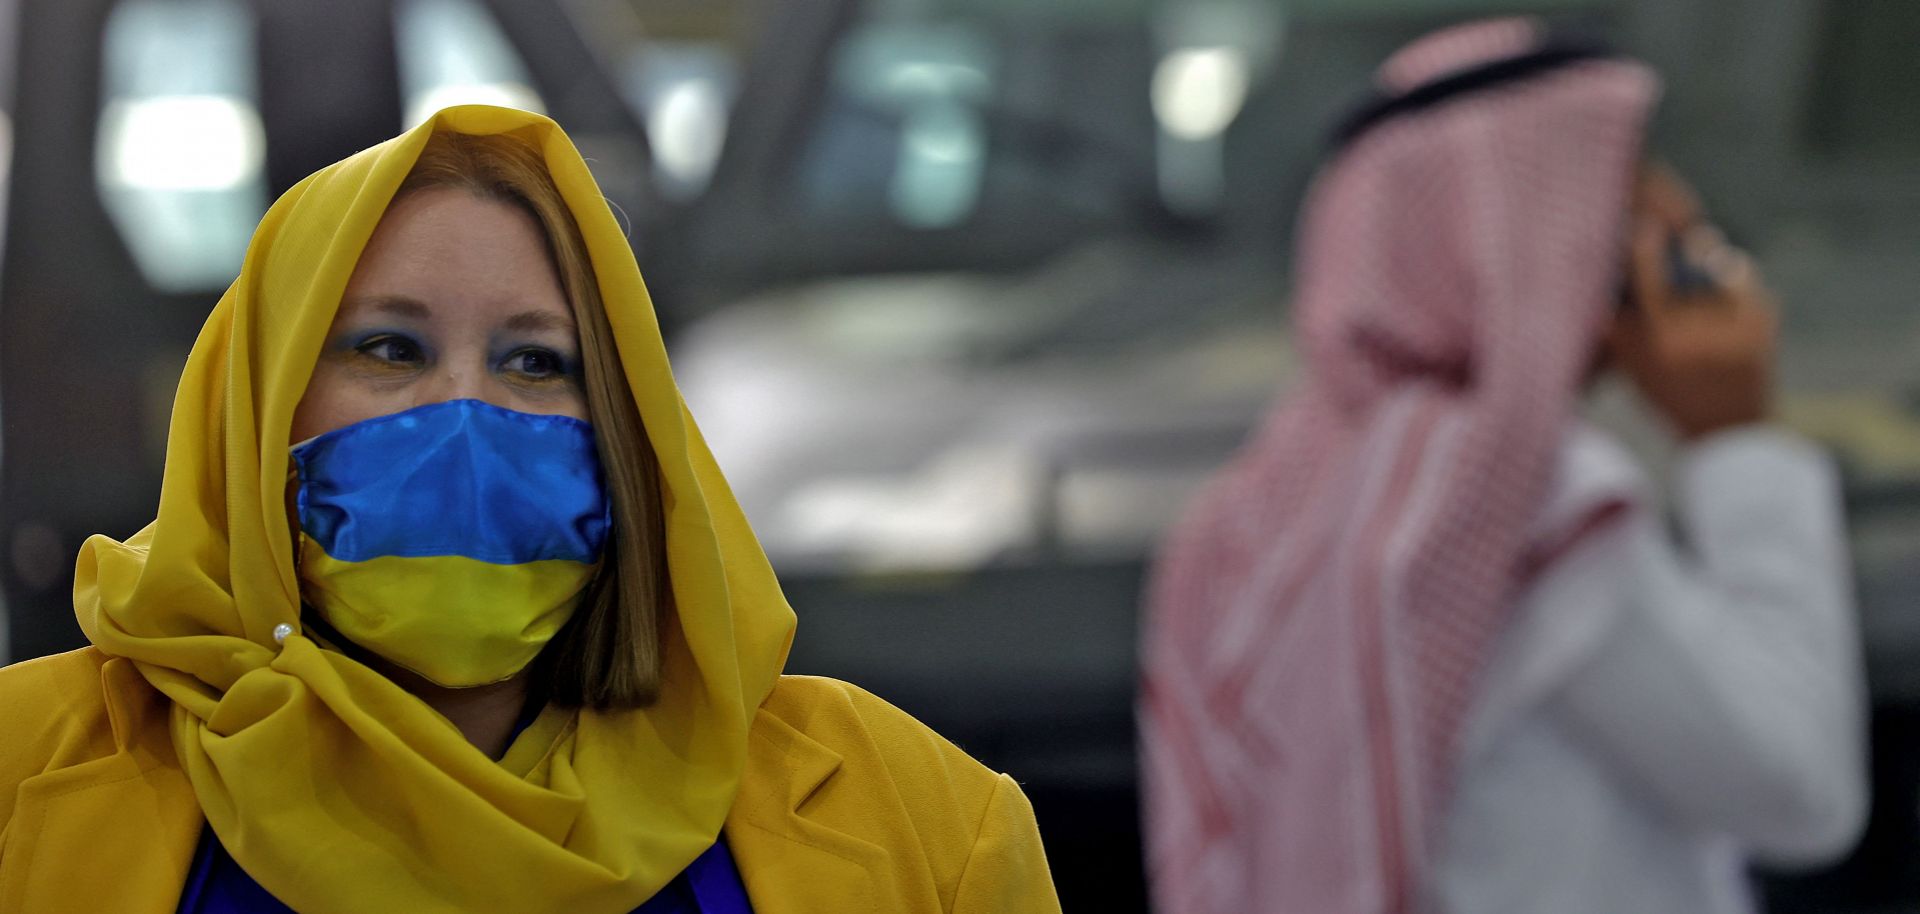 A worker at one of the stands at Saudi Arabia's first World Defense Show in Riyadh is seen wearing clothes in support of Ukraine on March 8, 2022.